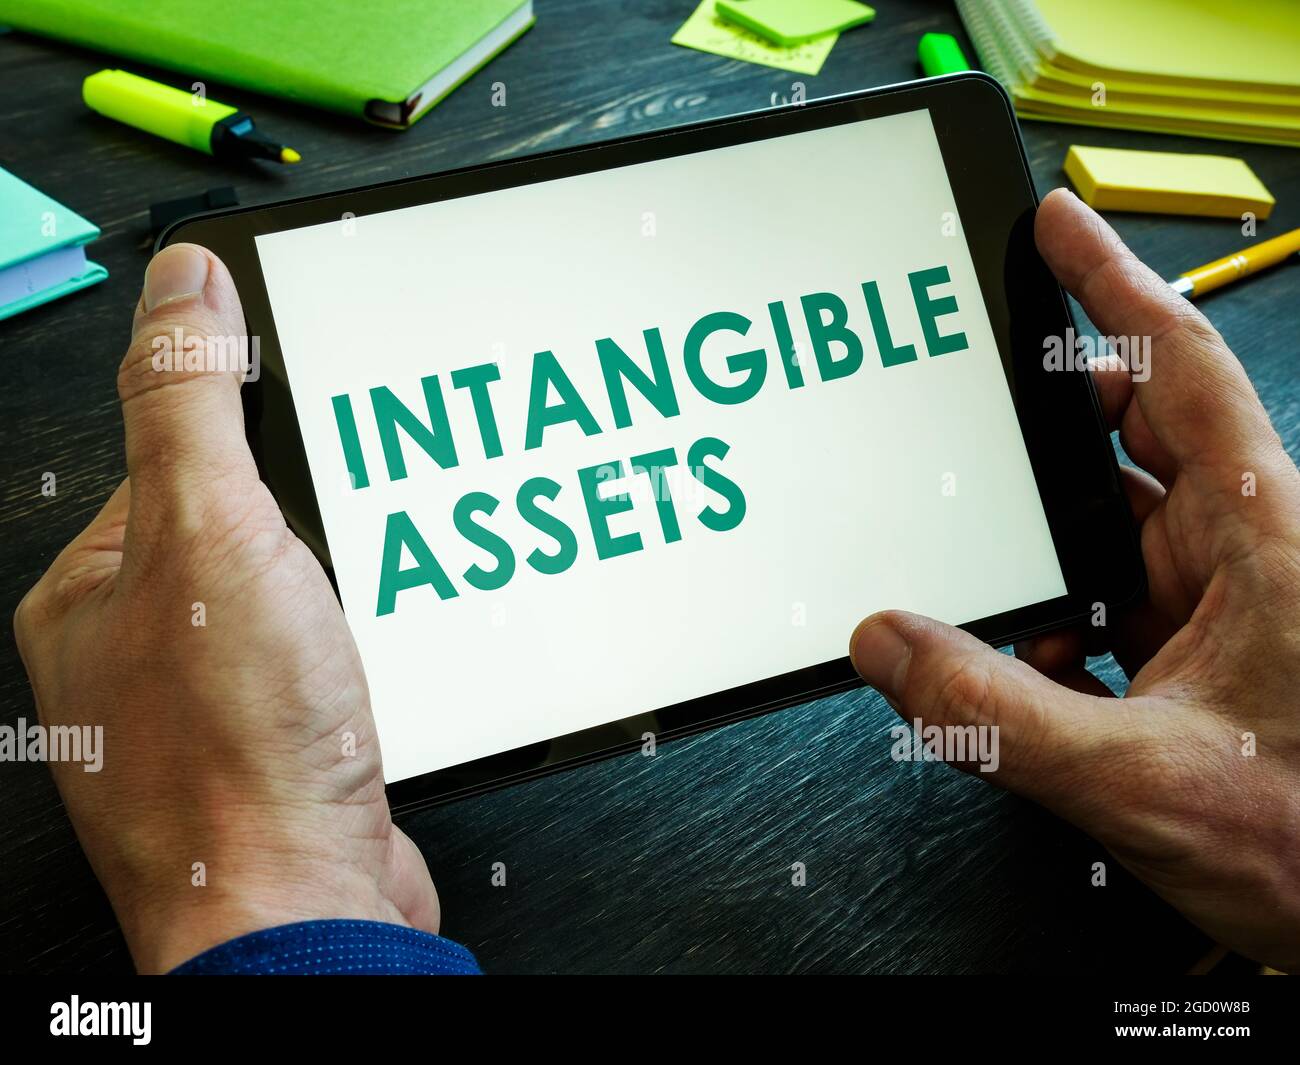 Man reads report about intangible assets on the tablet. Stock Photo